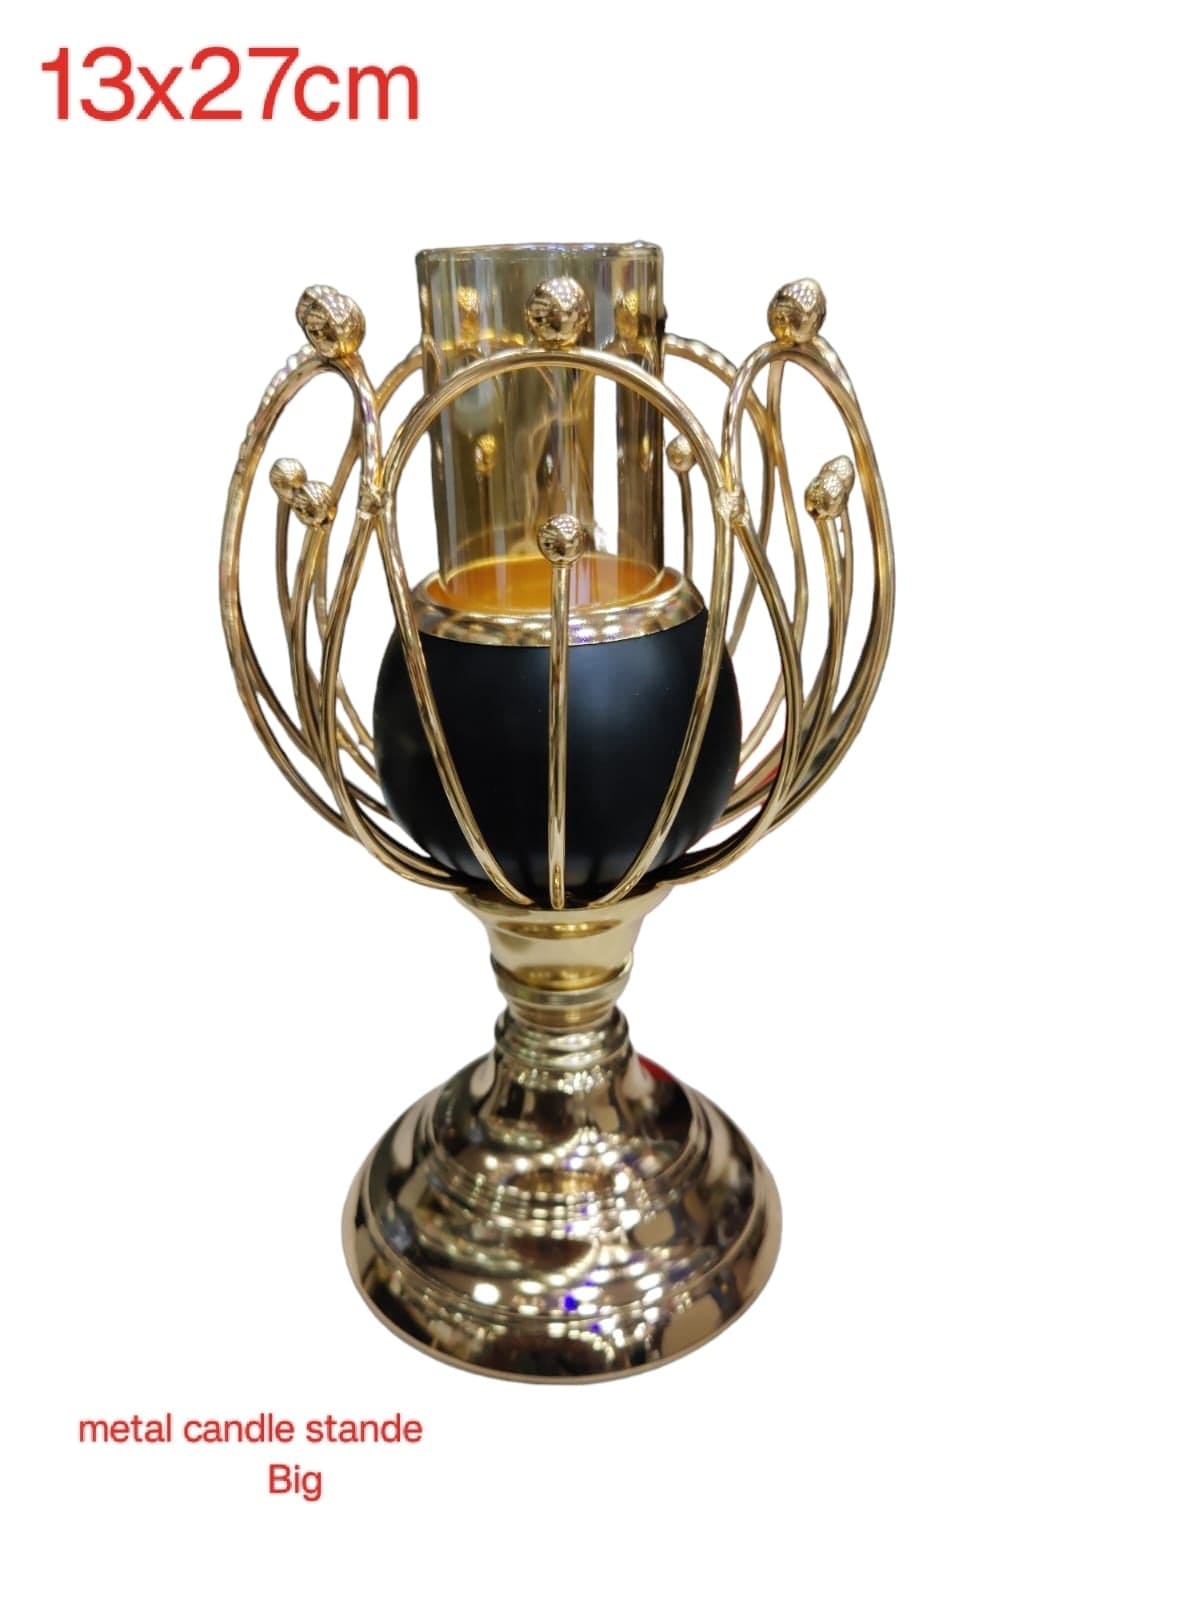 Eleanor Caged Candle Holder, Classical Iron Candle Holder With Stand, Gold Lantern Metal Candlestick, Nordic Home Decor Wrought Iron Candle Holder, Metal Candlestick Wedding Bedroom Table Decoration